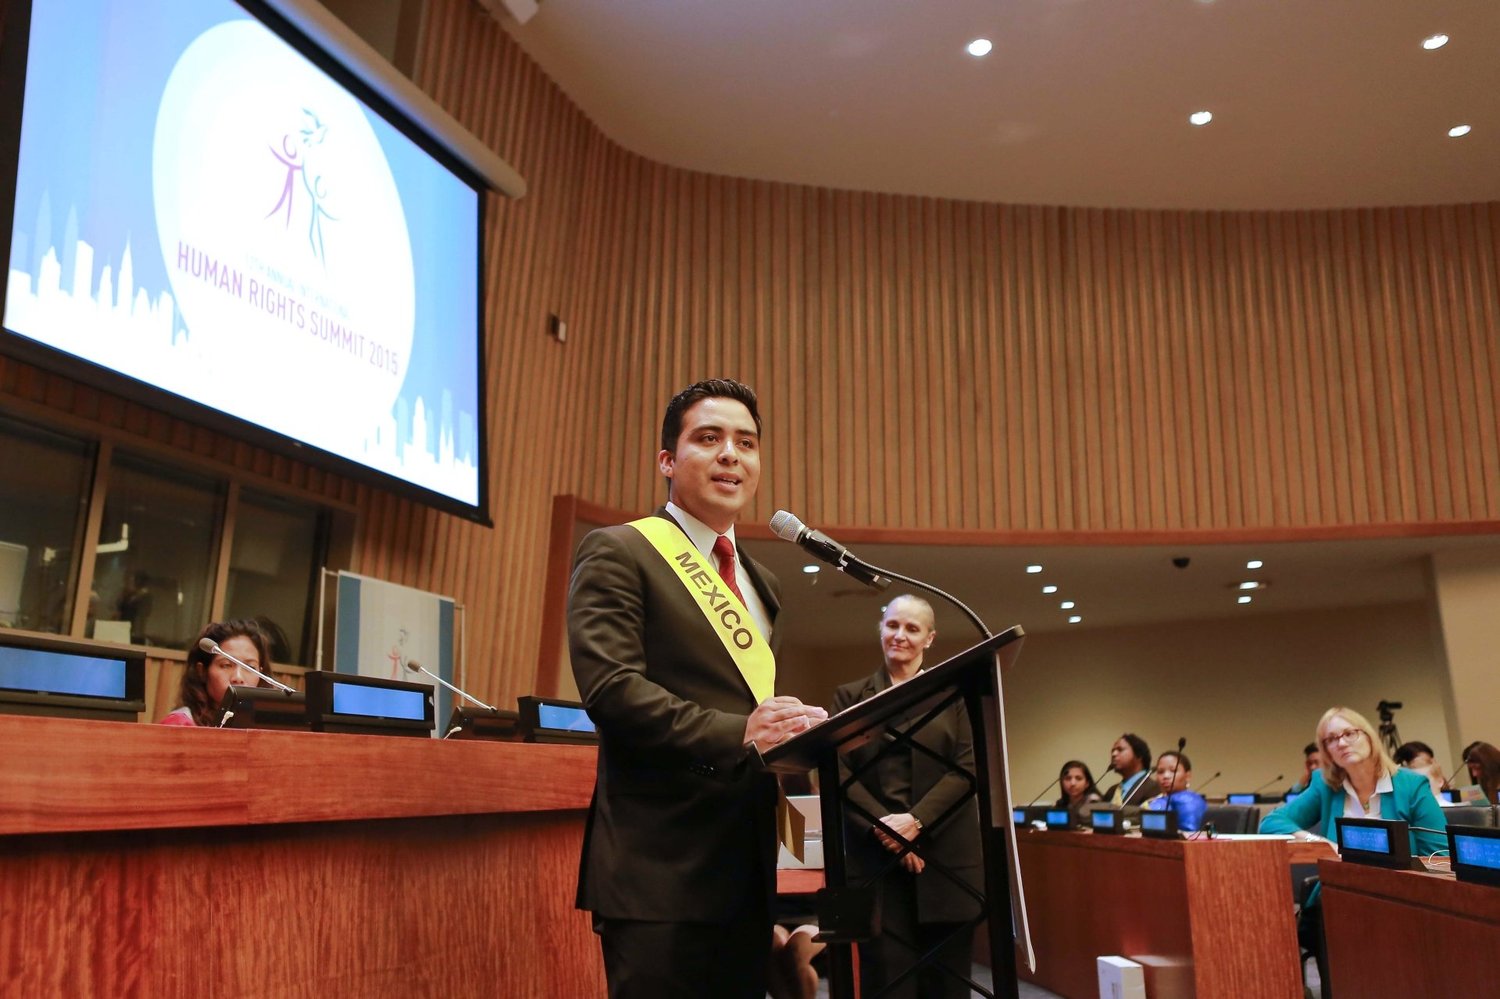 Youth delegate Francisco Javier Carrasco represented Mexico at the 12th annual Youth Summit